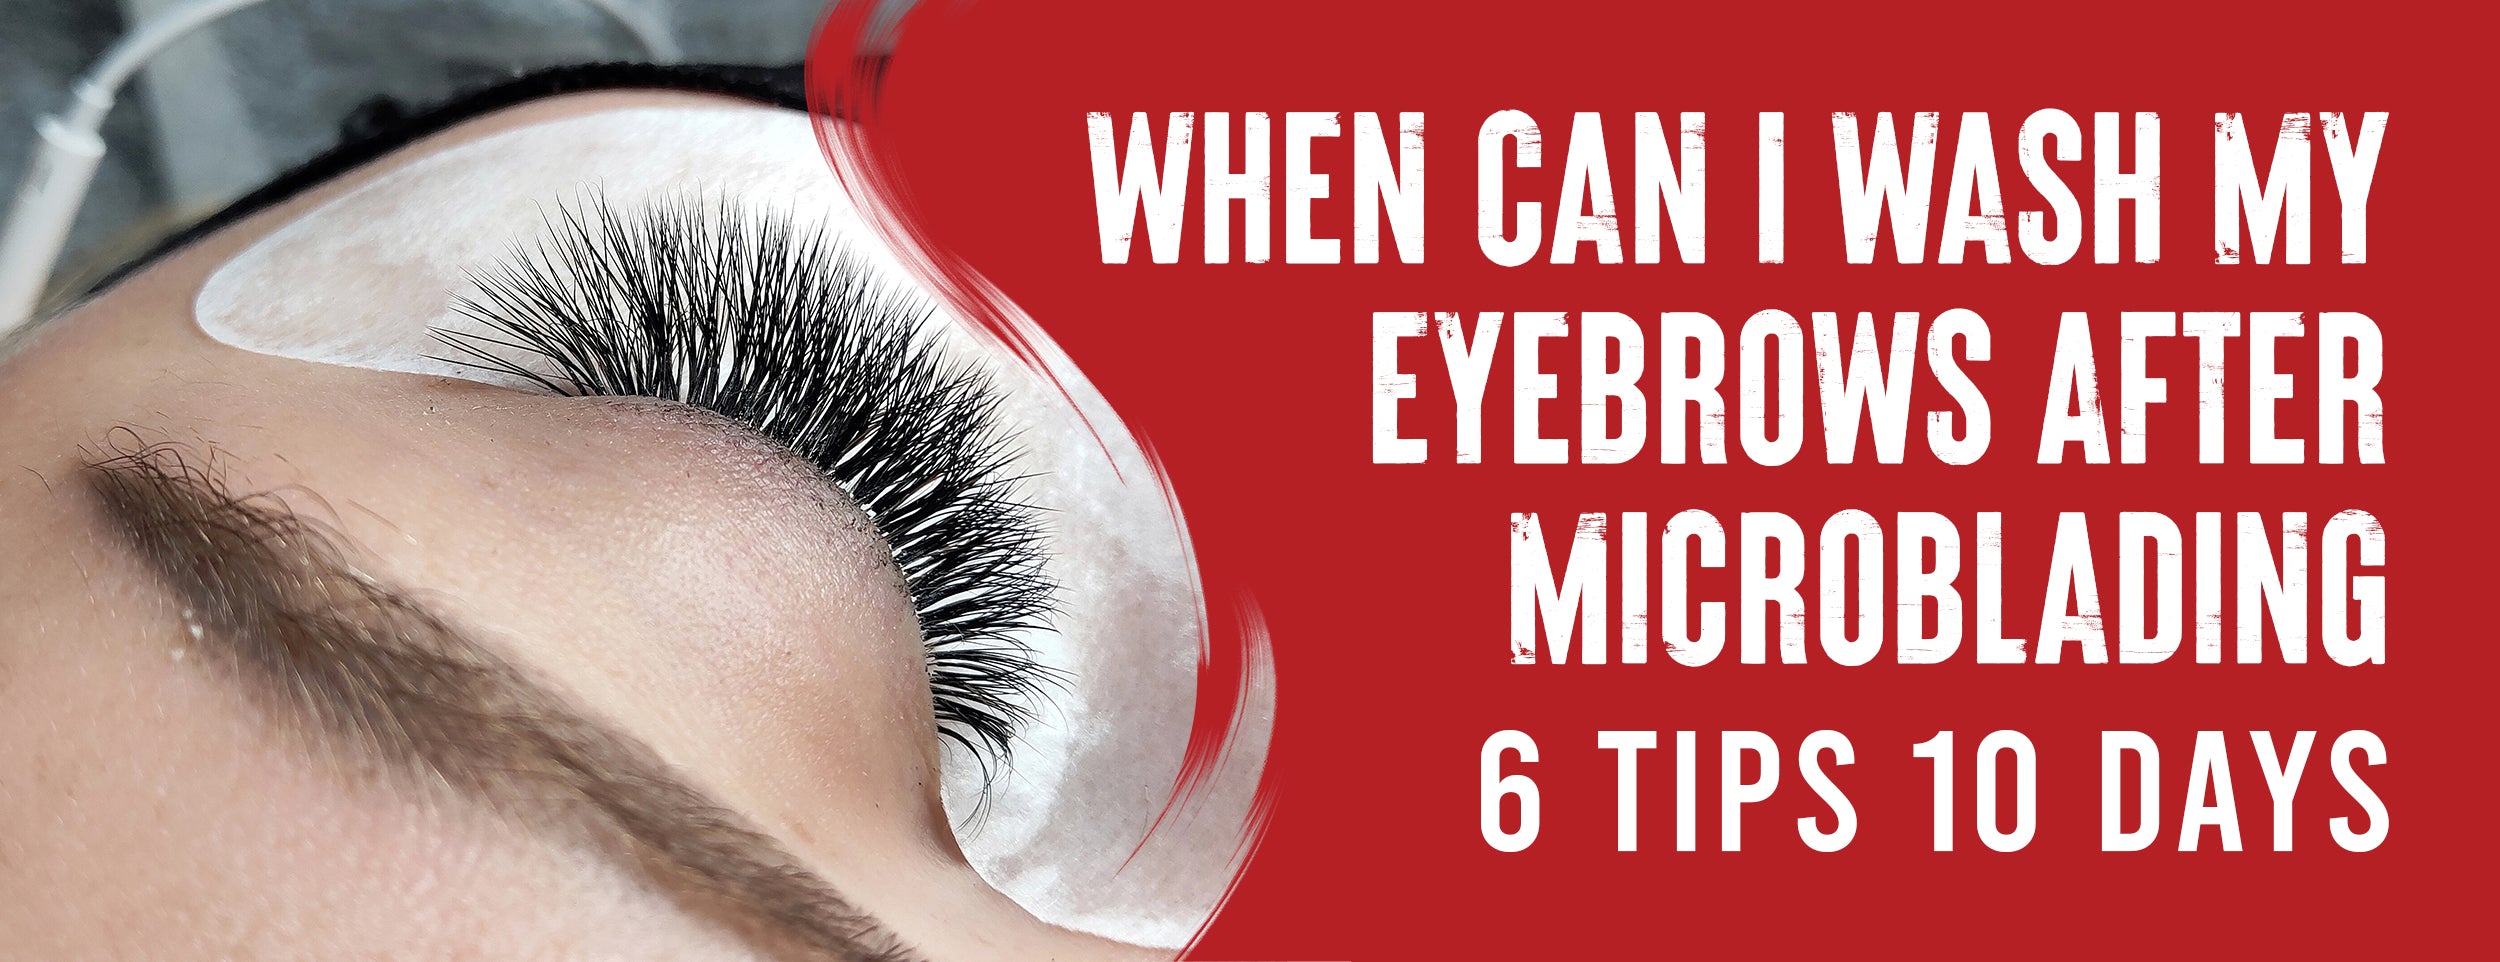 6 Tips & When To Wash My Eyebrows After Microblading